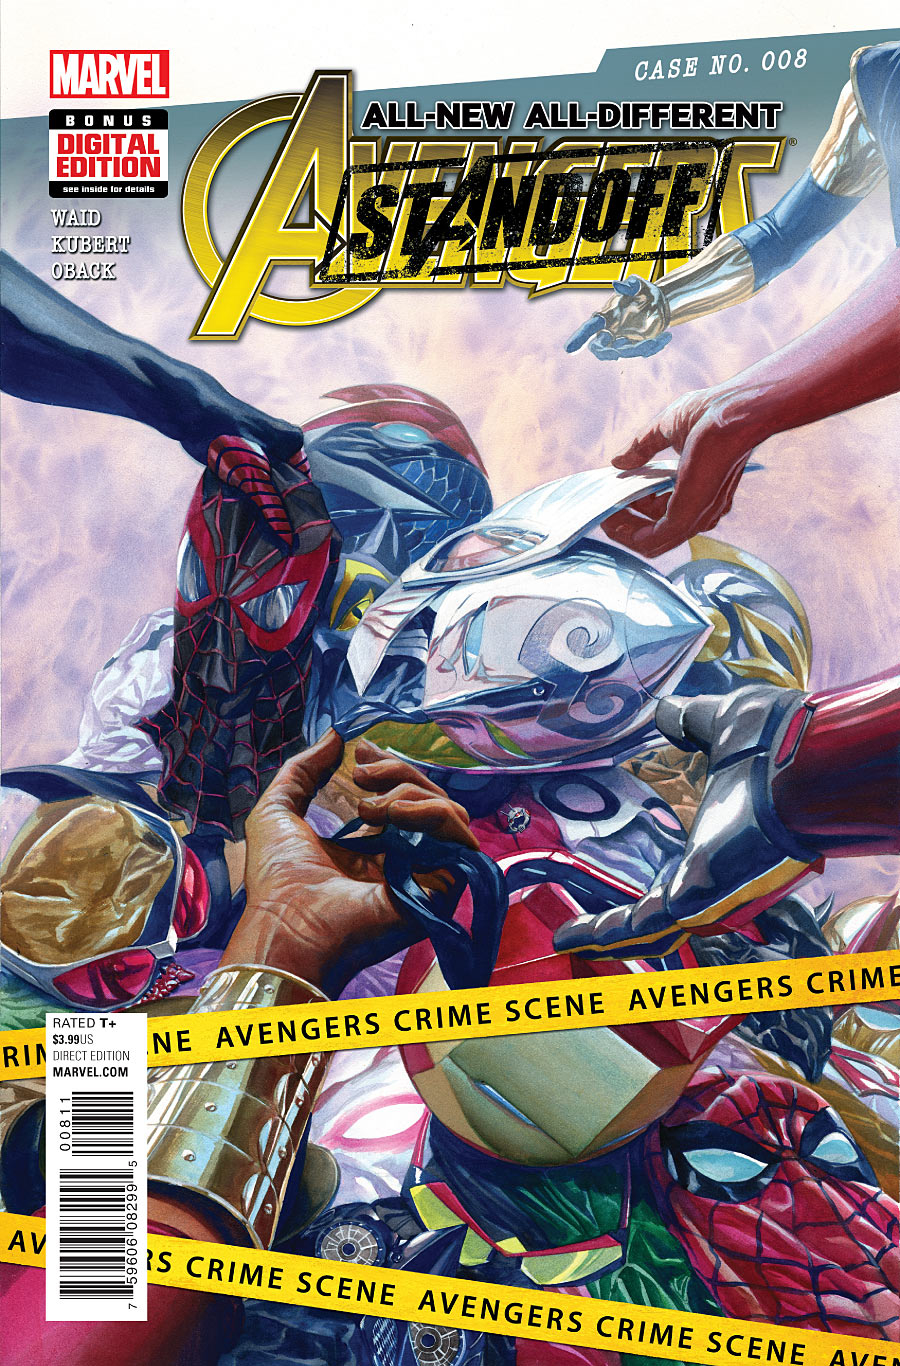 ALL NEW ALL DIFFERENT AVENGERS #8 ASO